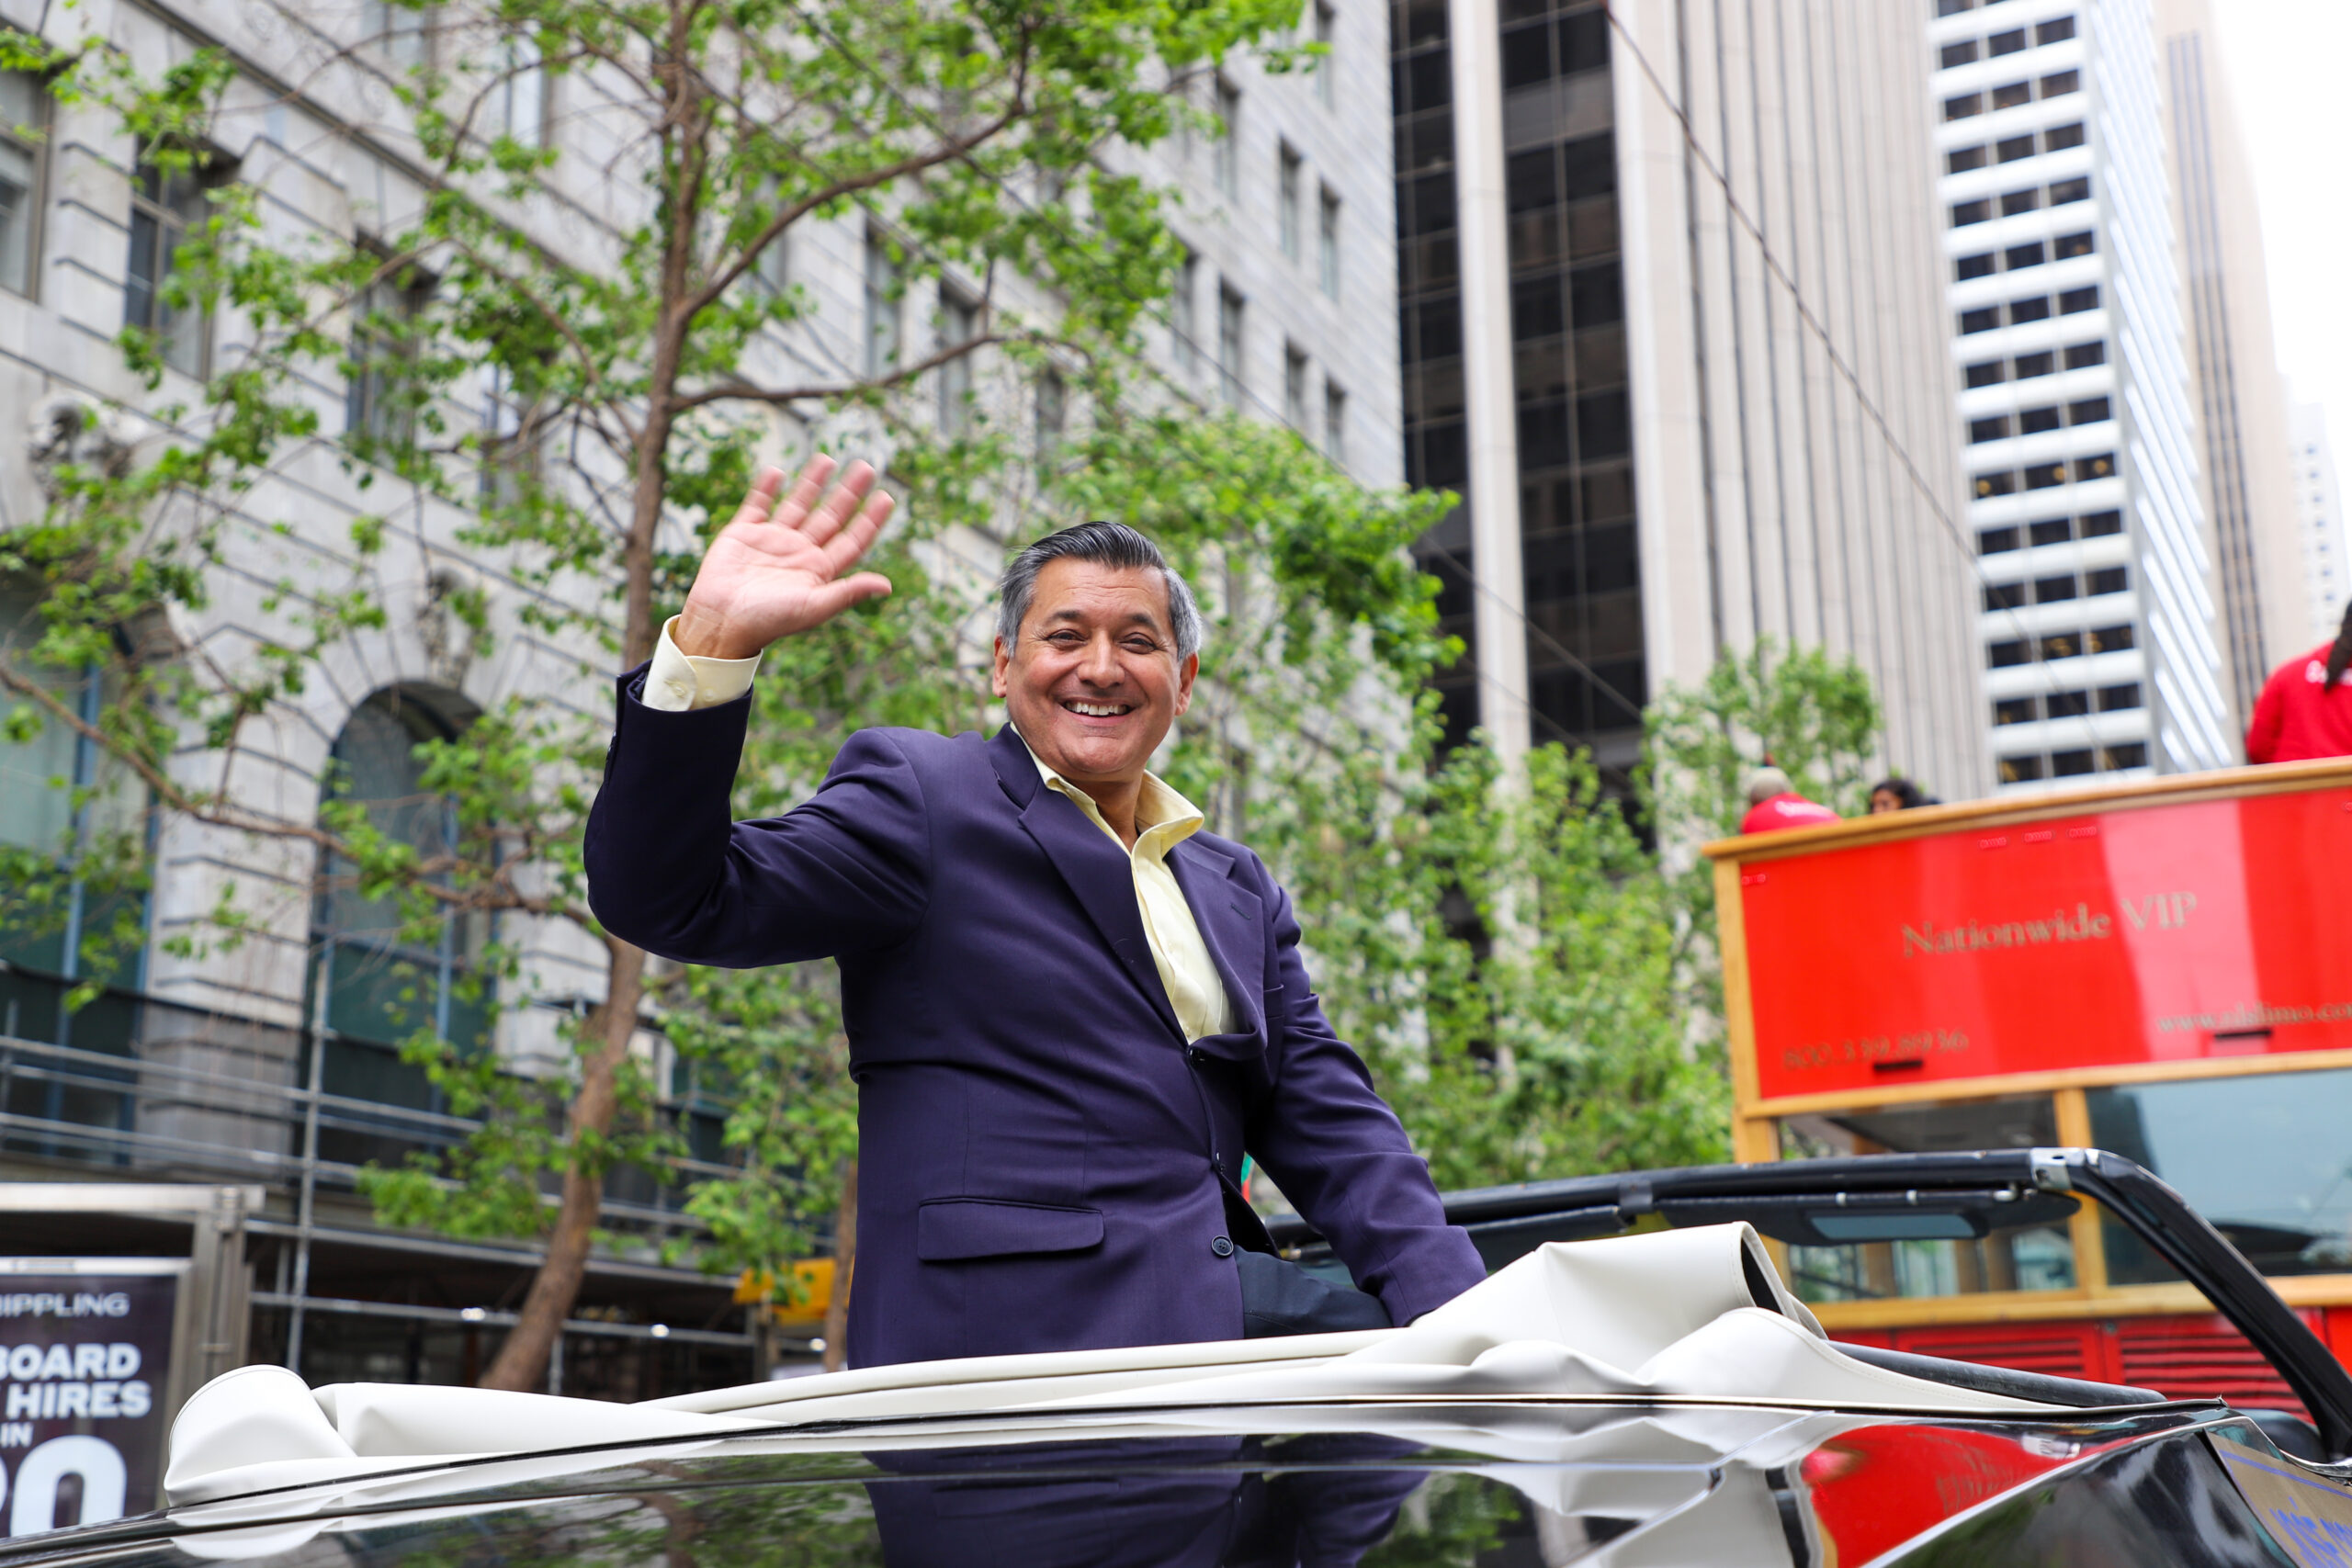 A person in a suit waving from a convertible, with trees and high-rise buildings in the background.